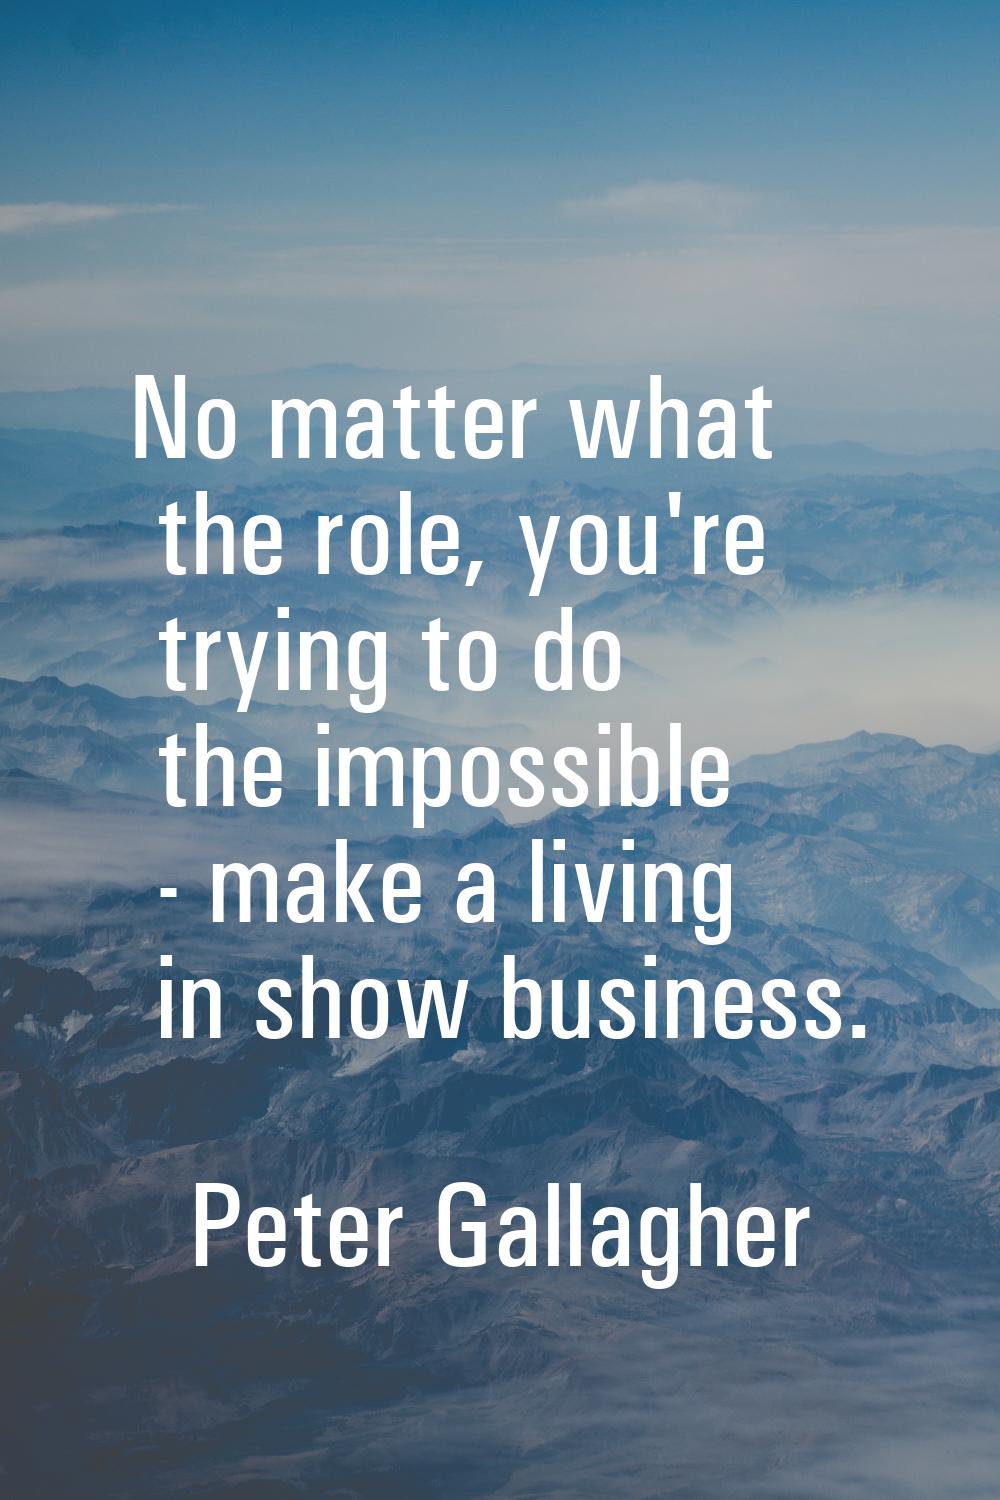 No matter what the role, you're trying to do the impossible - make a living in show business.